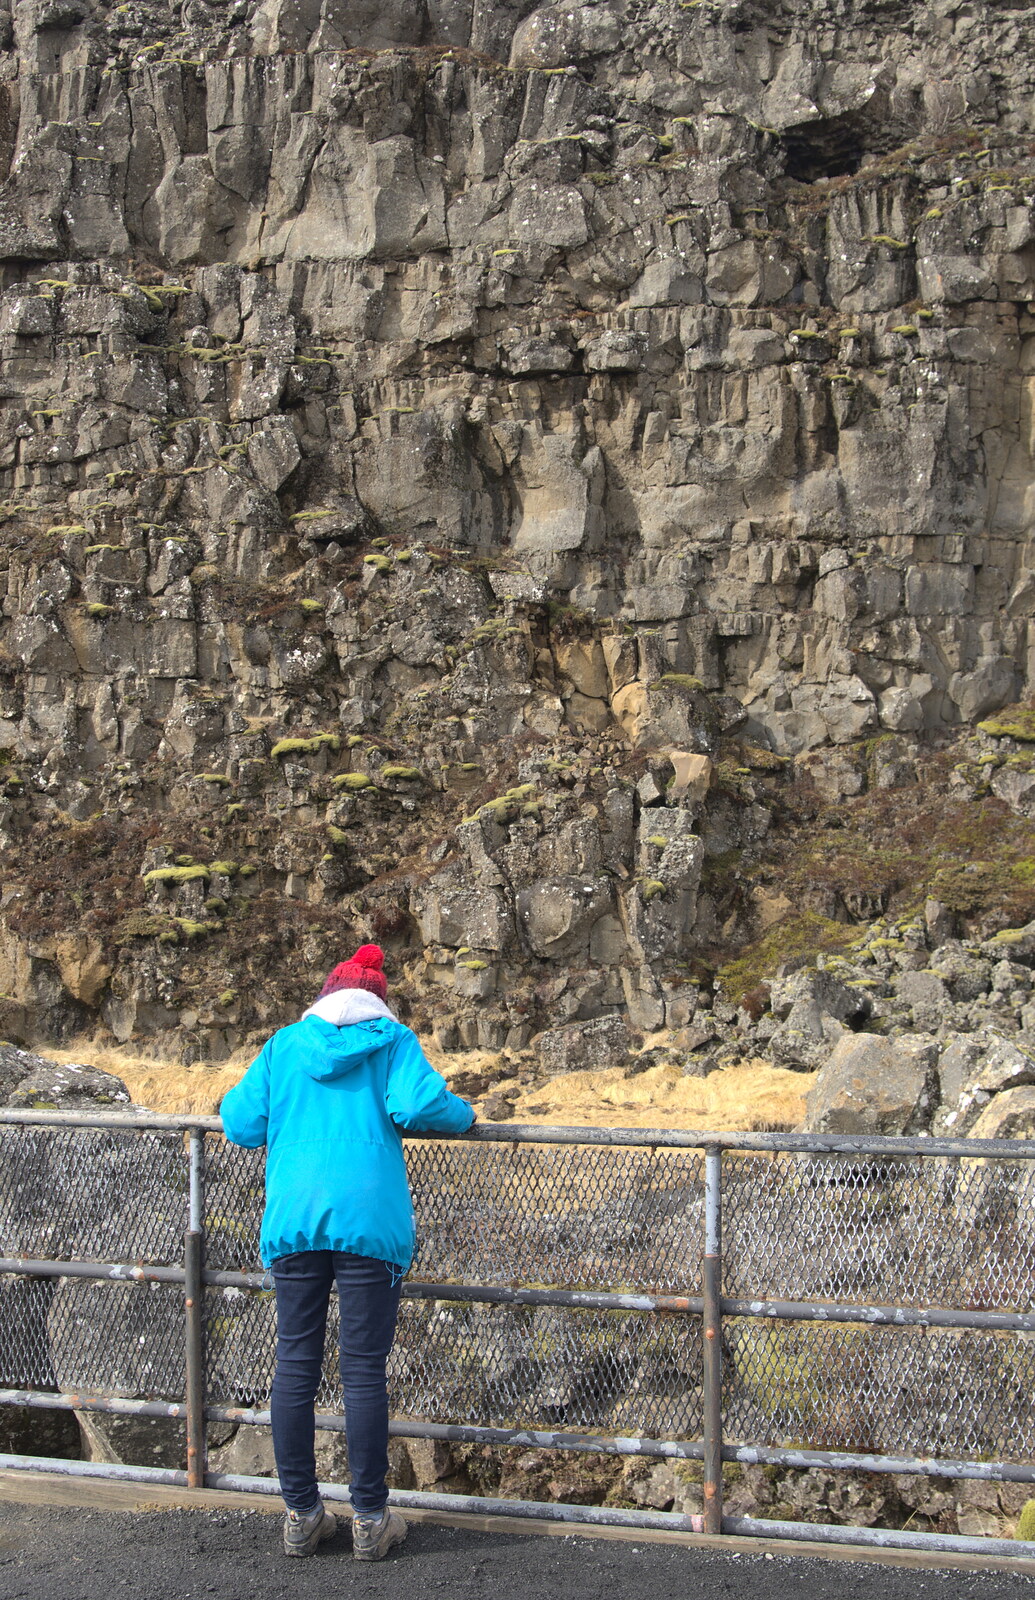 Isobel looks into the edge of the American plate from The Golden Circle of Ísland, Iceland - 22nd April 2017